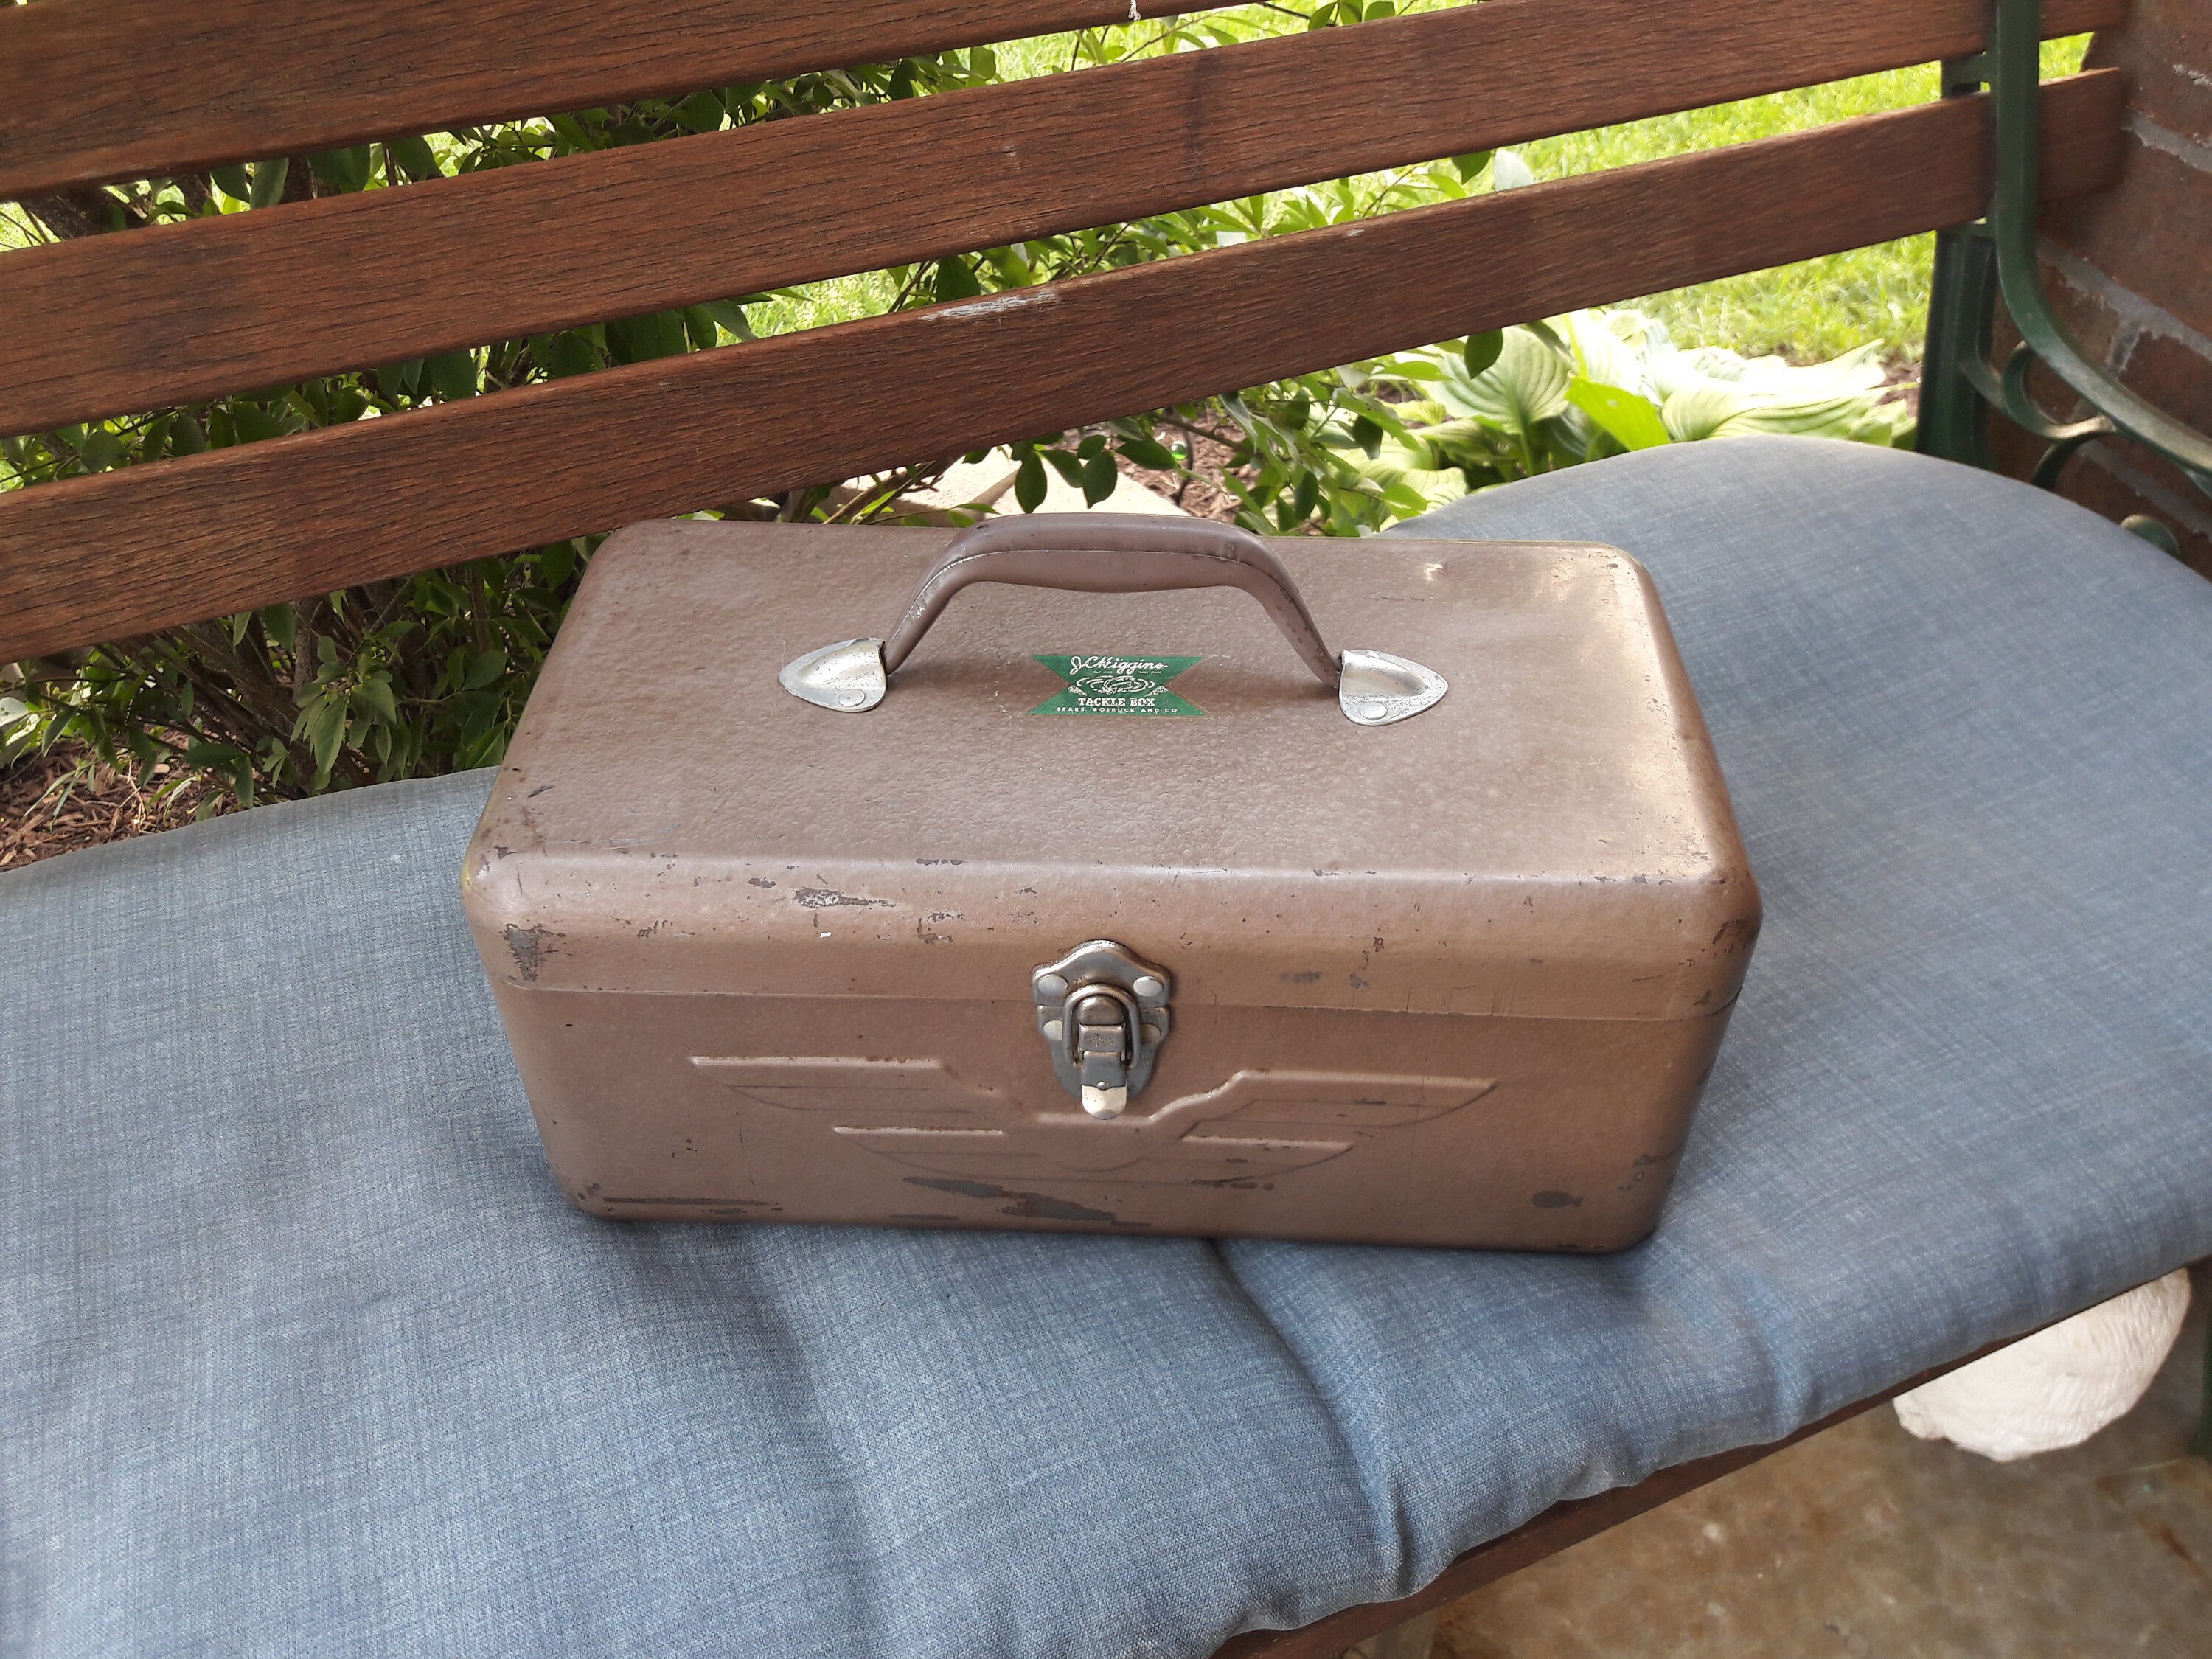 Vintage 1950's JC Higgins Tackle Box by Sears and Roebuck